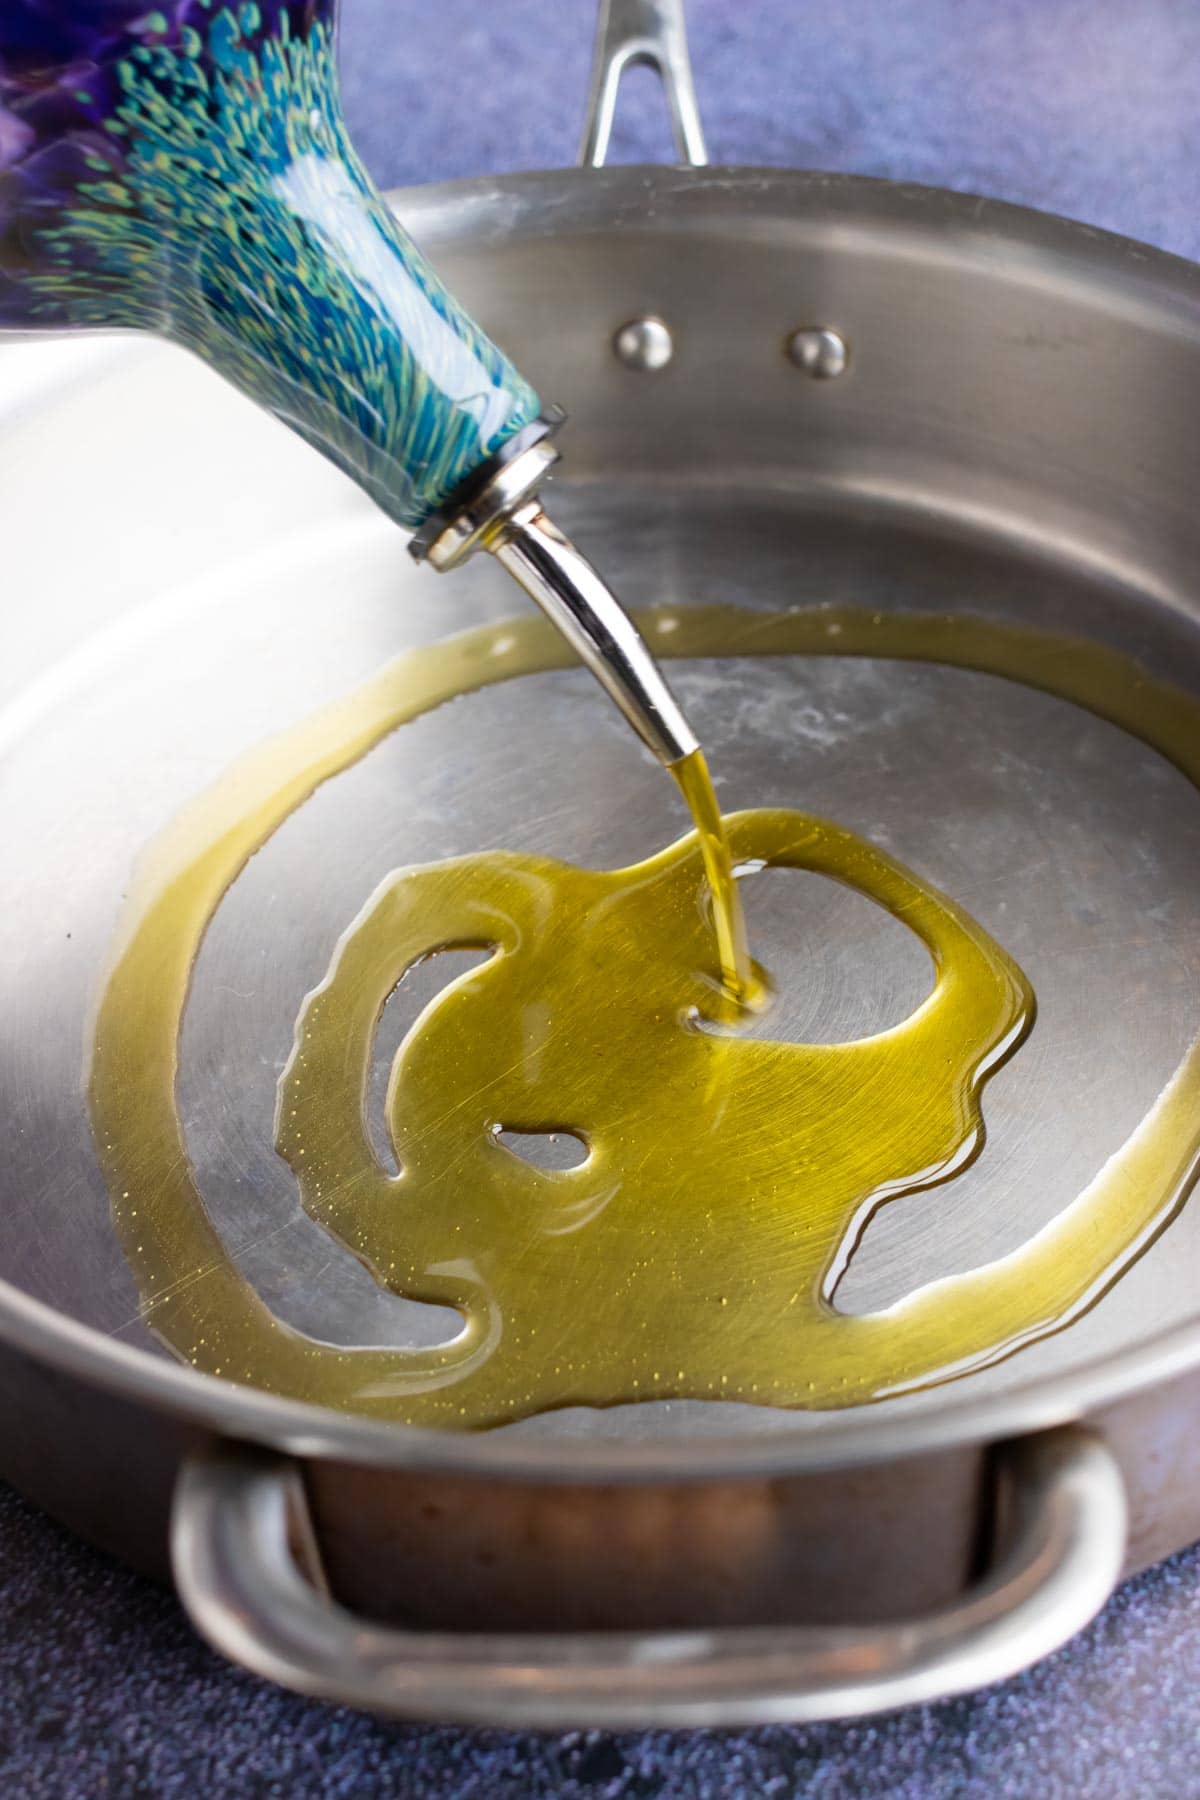 An image showing oil being added to a stainless steel pan.